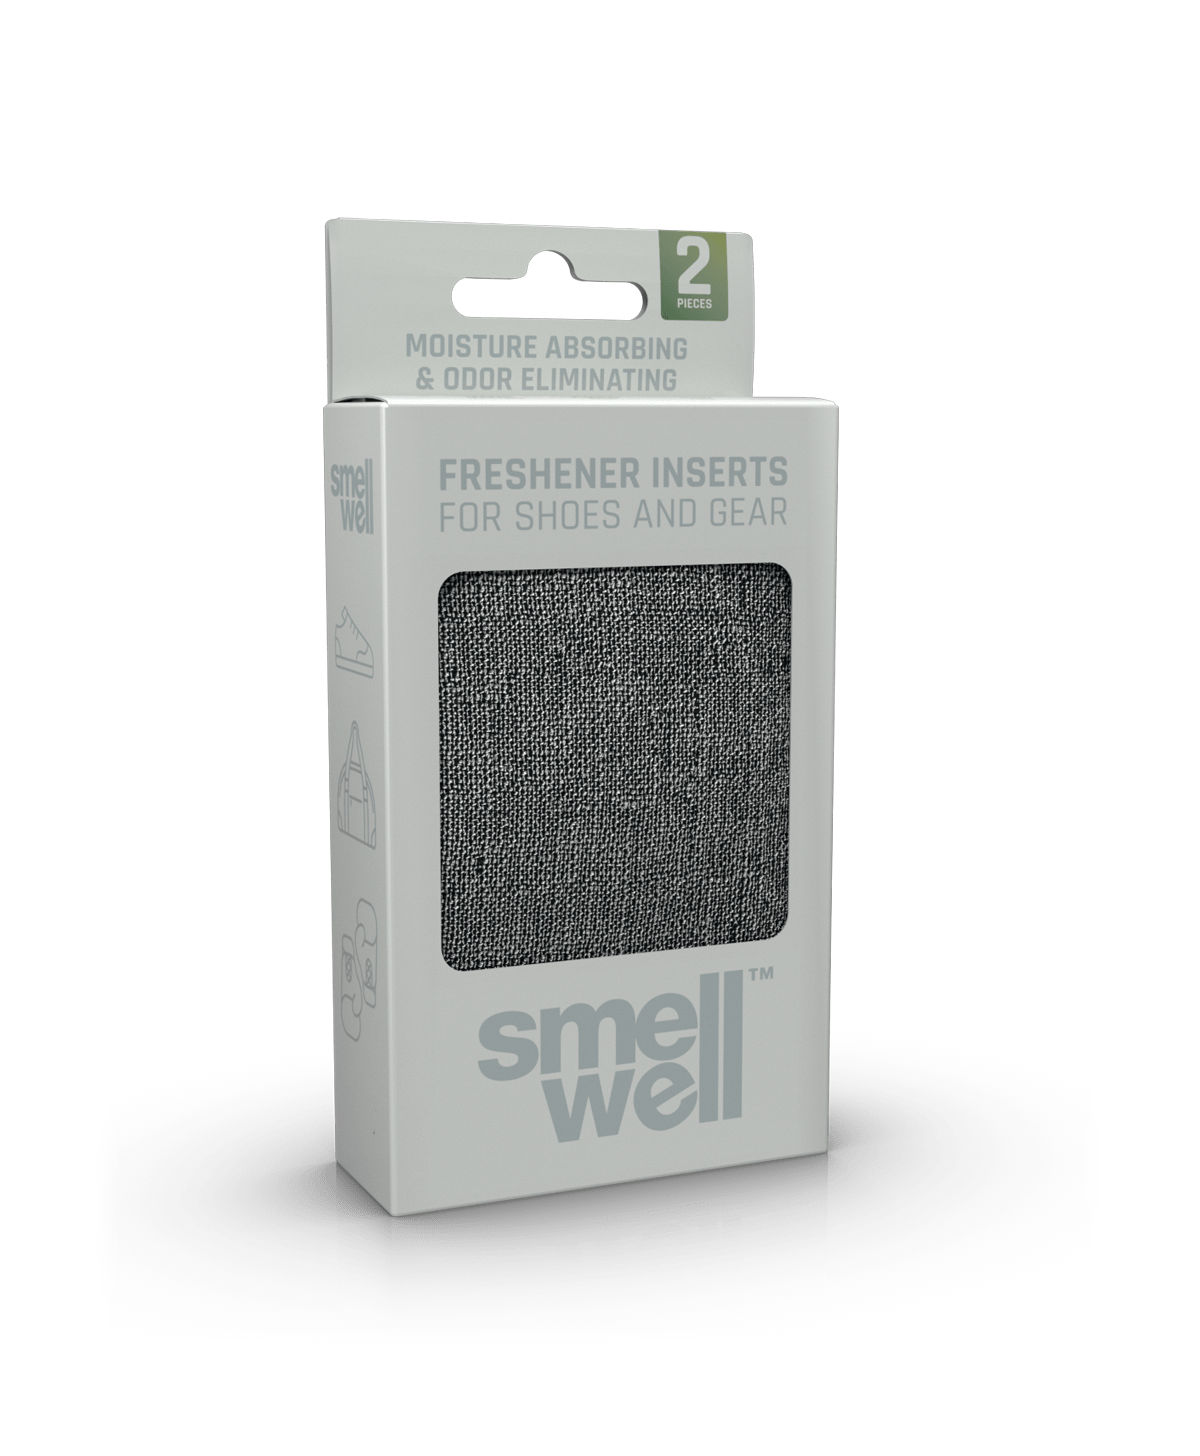 A package of SmellWell Sensitive - Grey from an angle